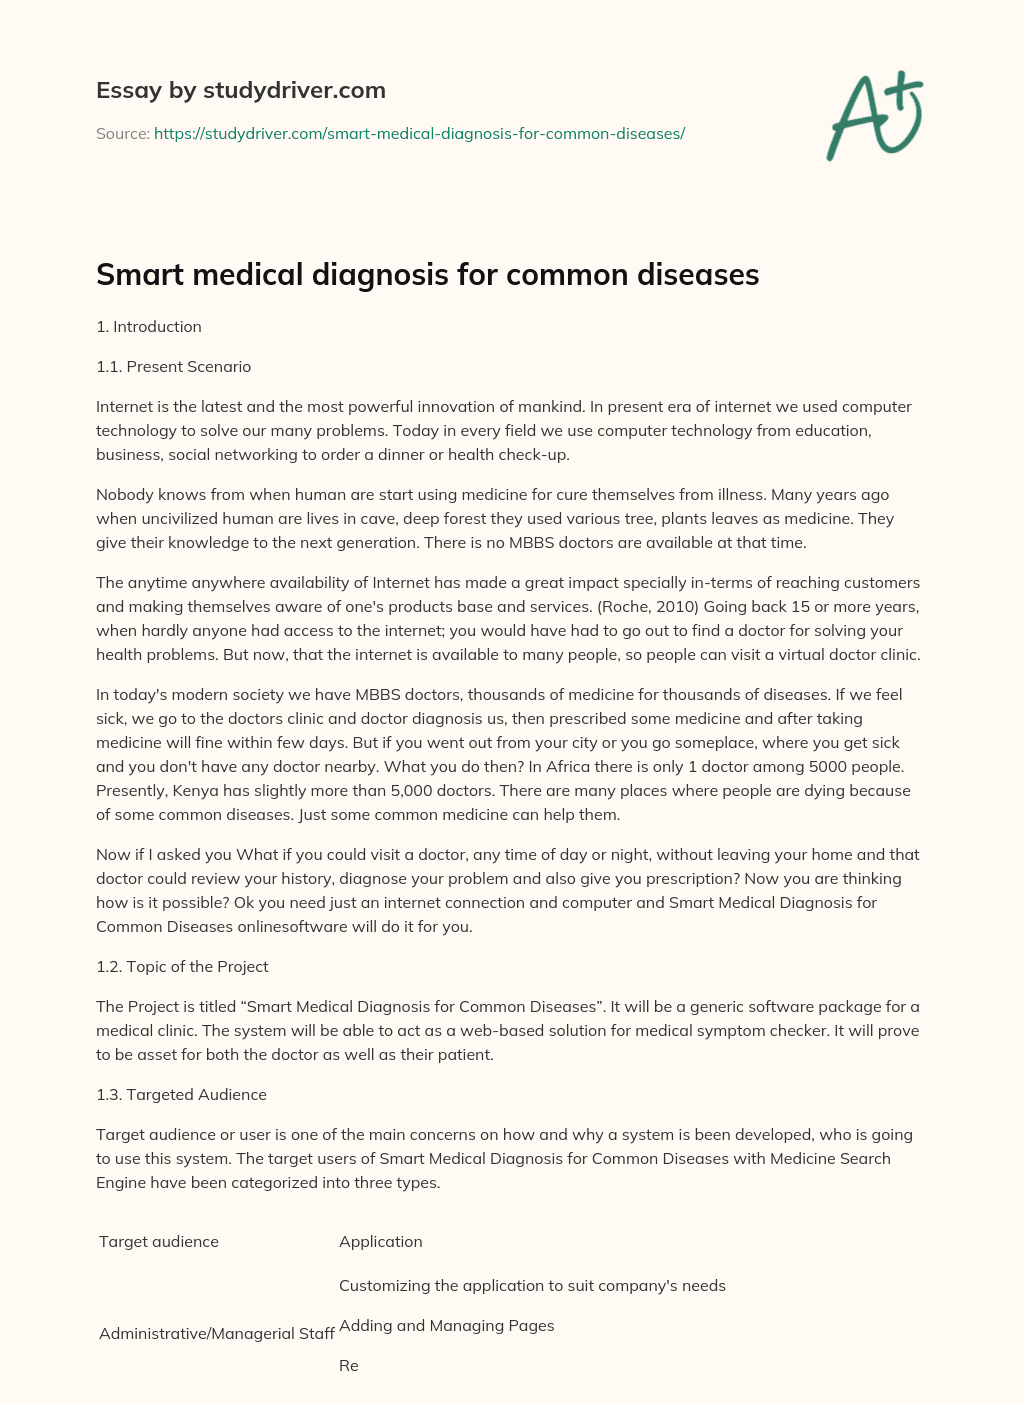 Smart Medical Diagnosis for Common Diseases essay